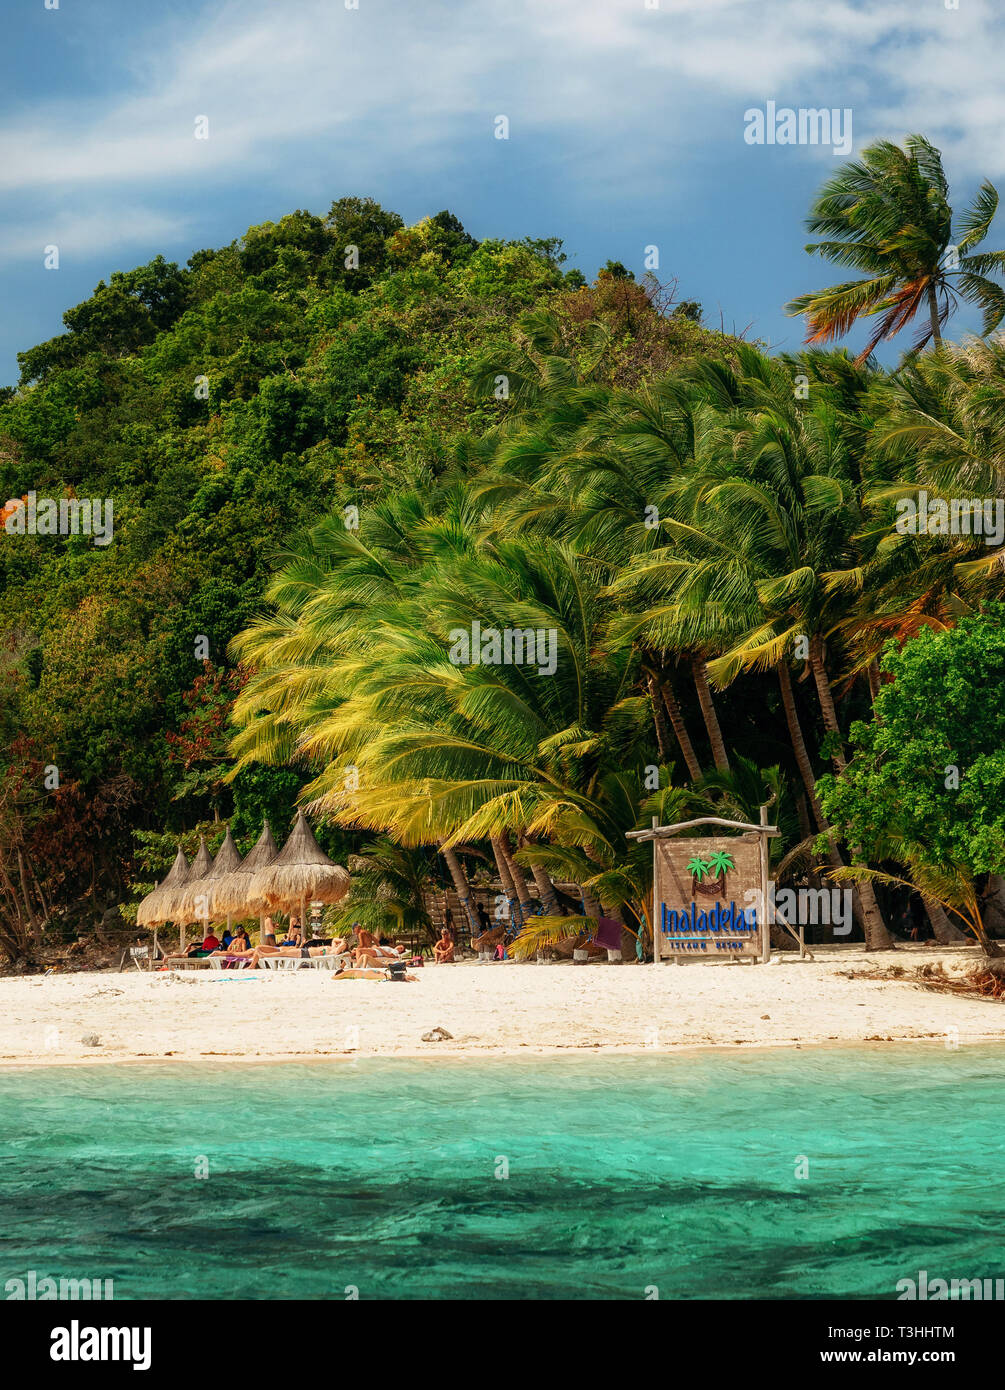 German island, San Vicente, Philippines - February 4, 2019: Sandy beach with turquoise water and green palm trees on tropical island Stock Photo